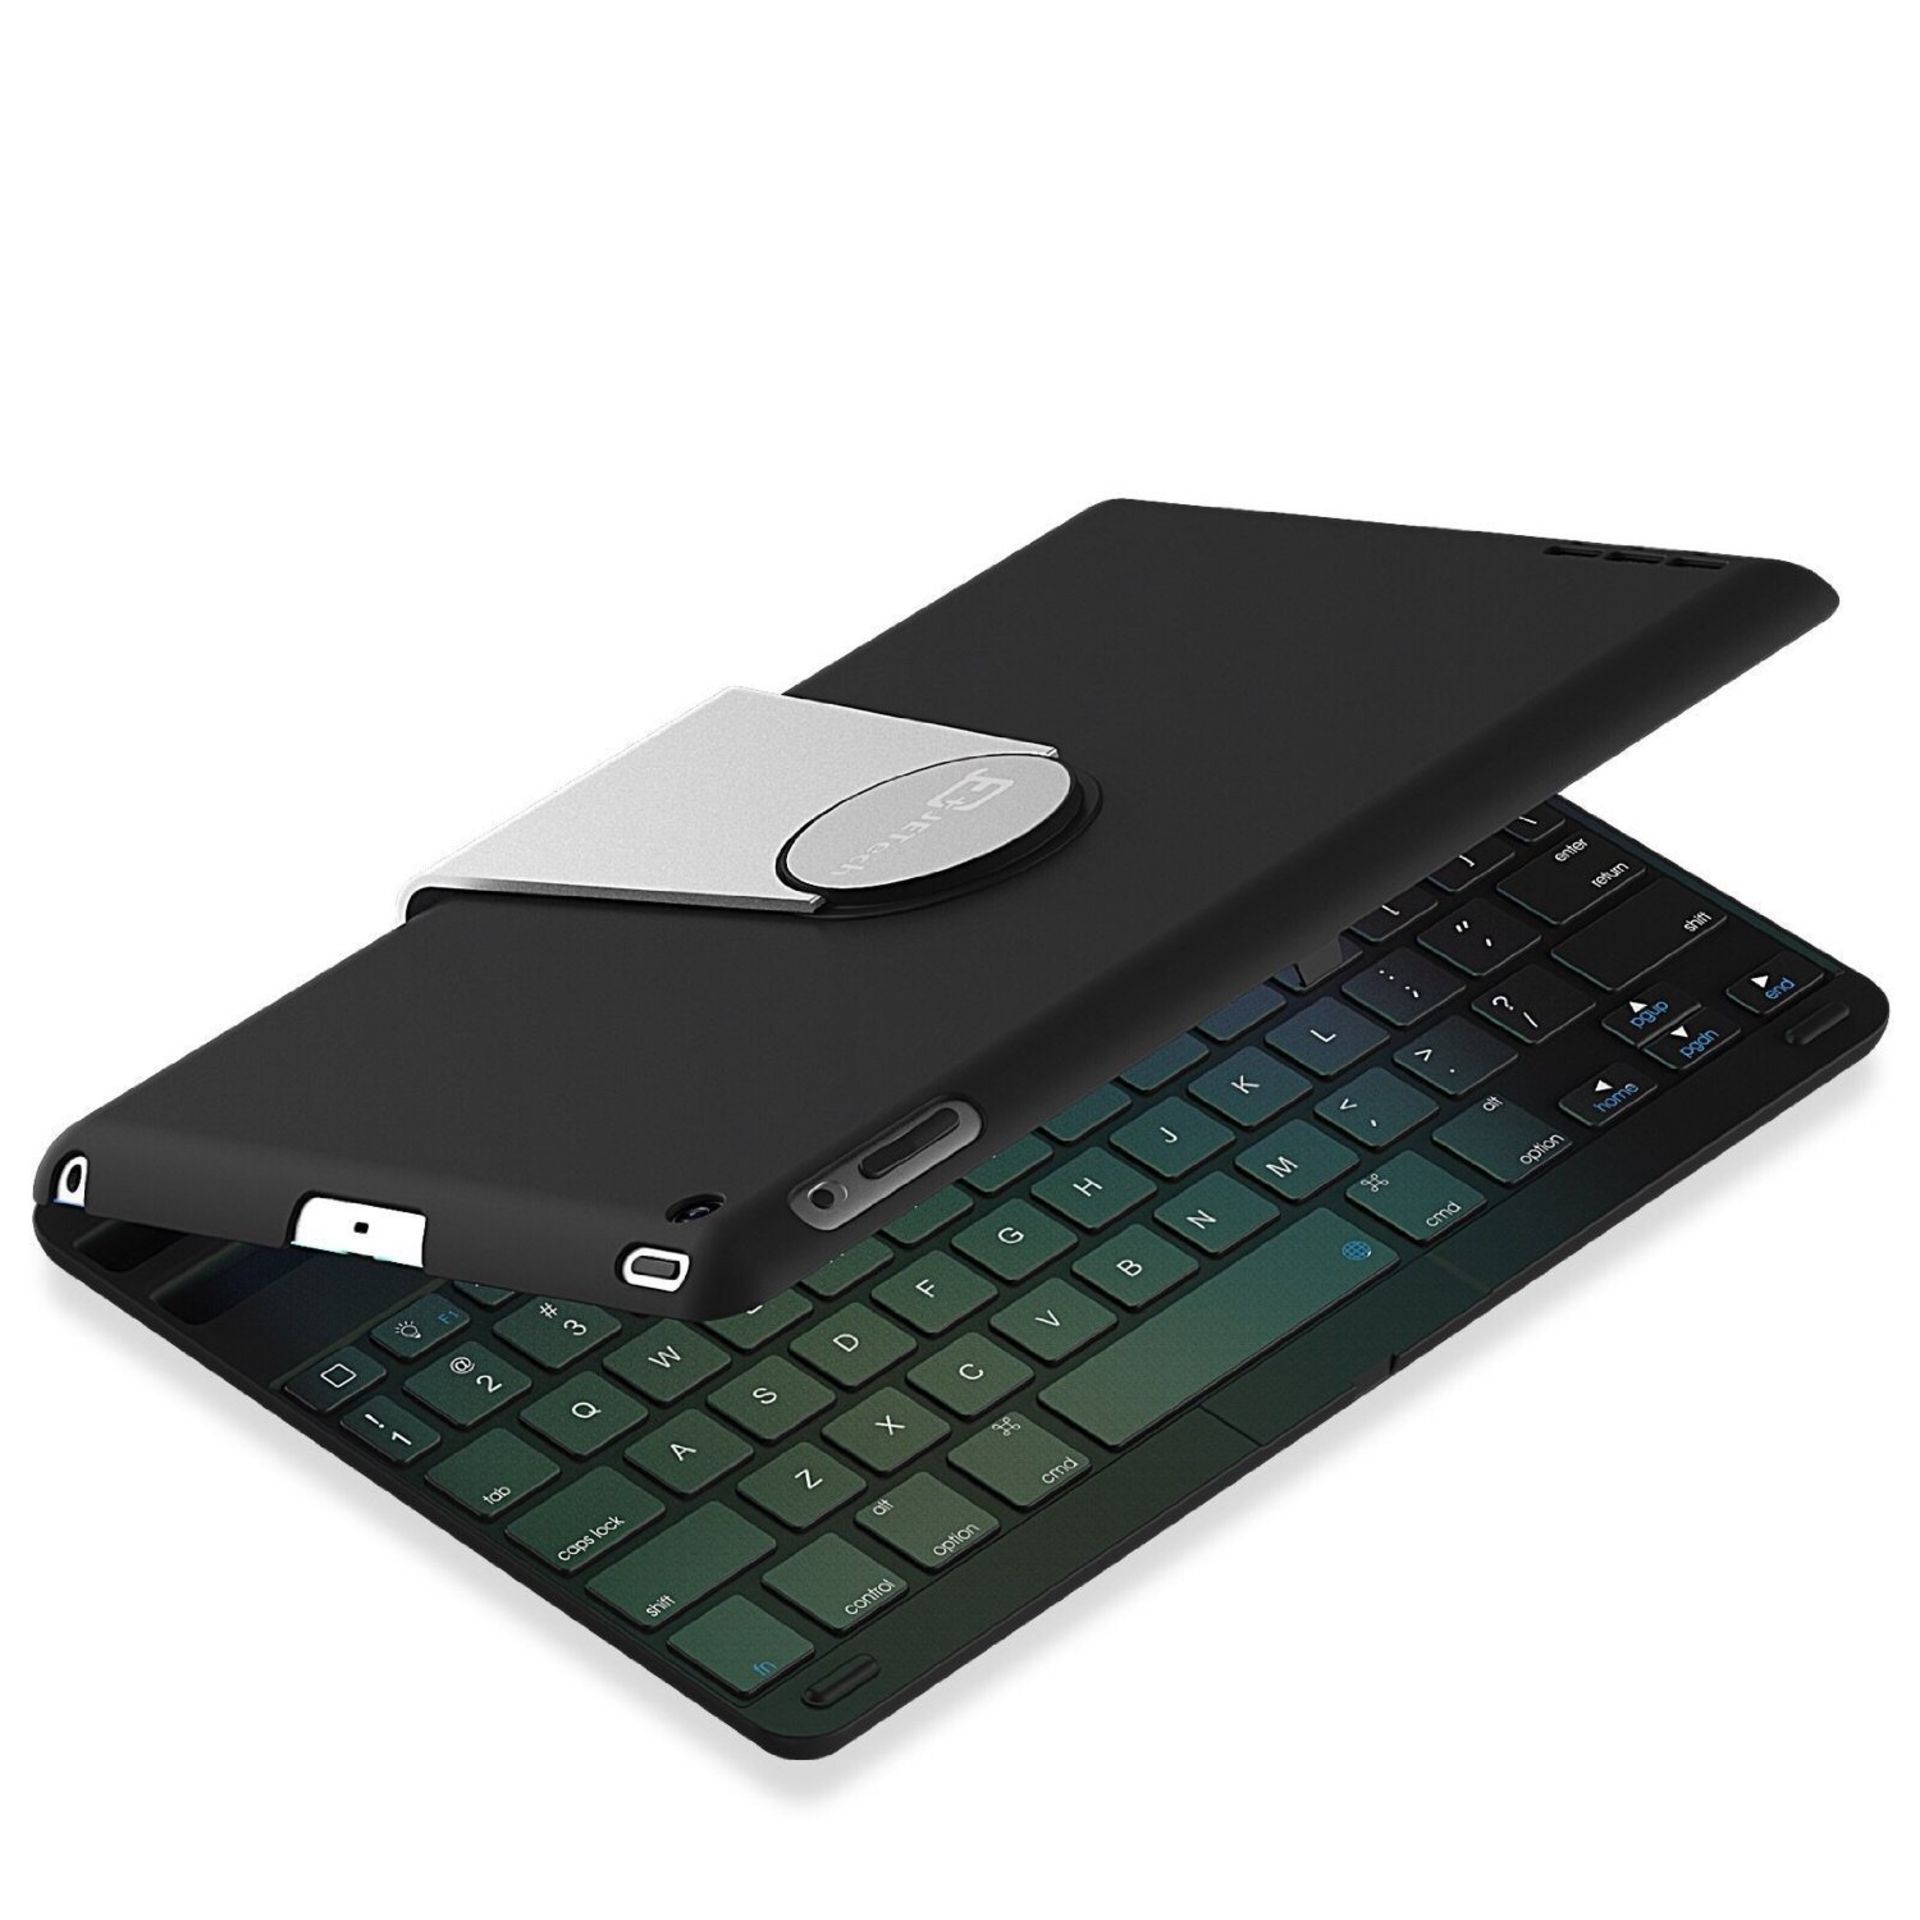 V Grade A Bluetooth Keyboard Case For Ipad Amazon Price - £25.95